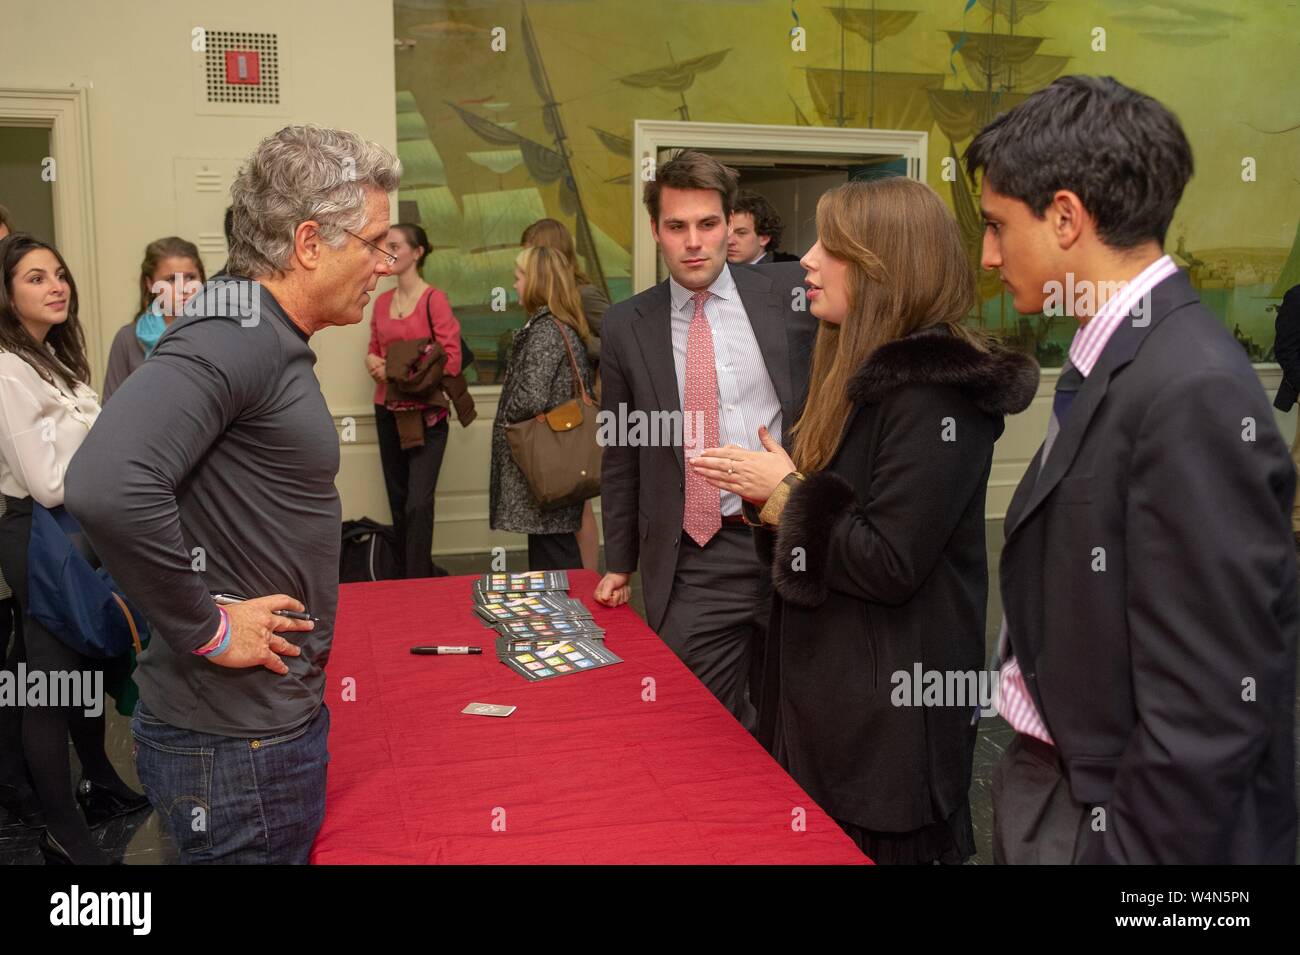 Profile view of Donny Deutsch, marketing professional and television personality, speaking with attendees at a Milton S Eisenhower Symposium at the Johns Hopkins University, Baltimore, Maryland, November 9, 2010. From the Homewood Photography Collection. () Stock Photo